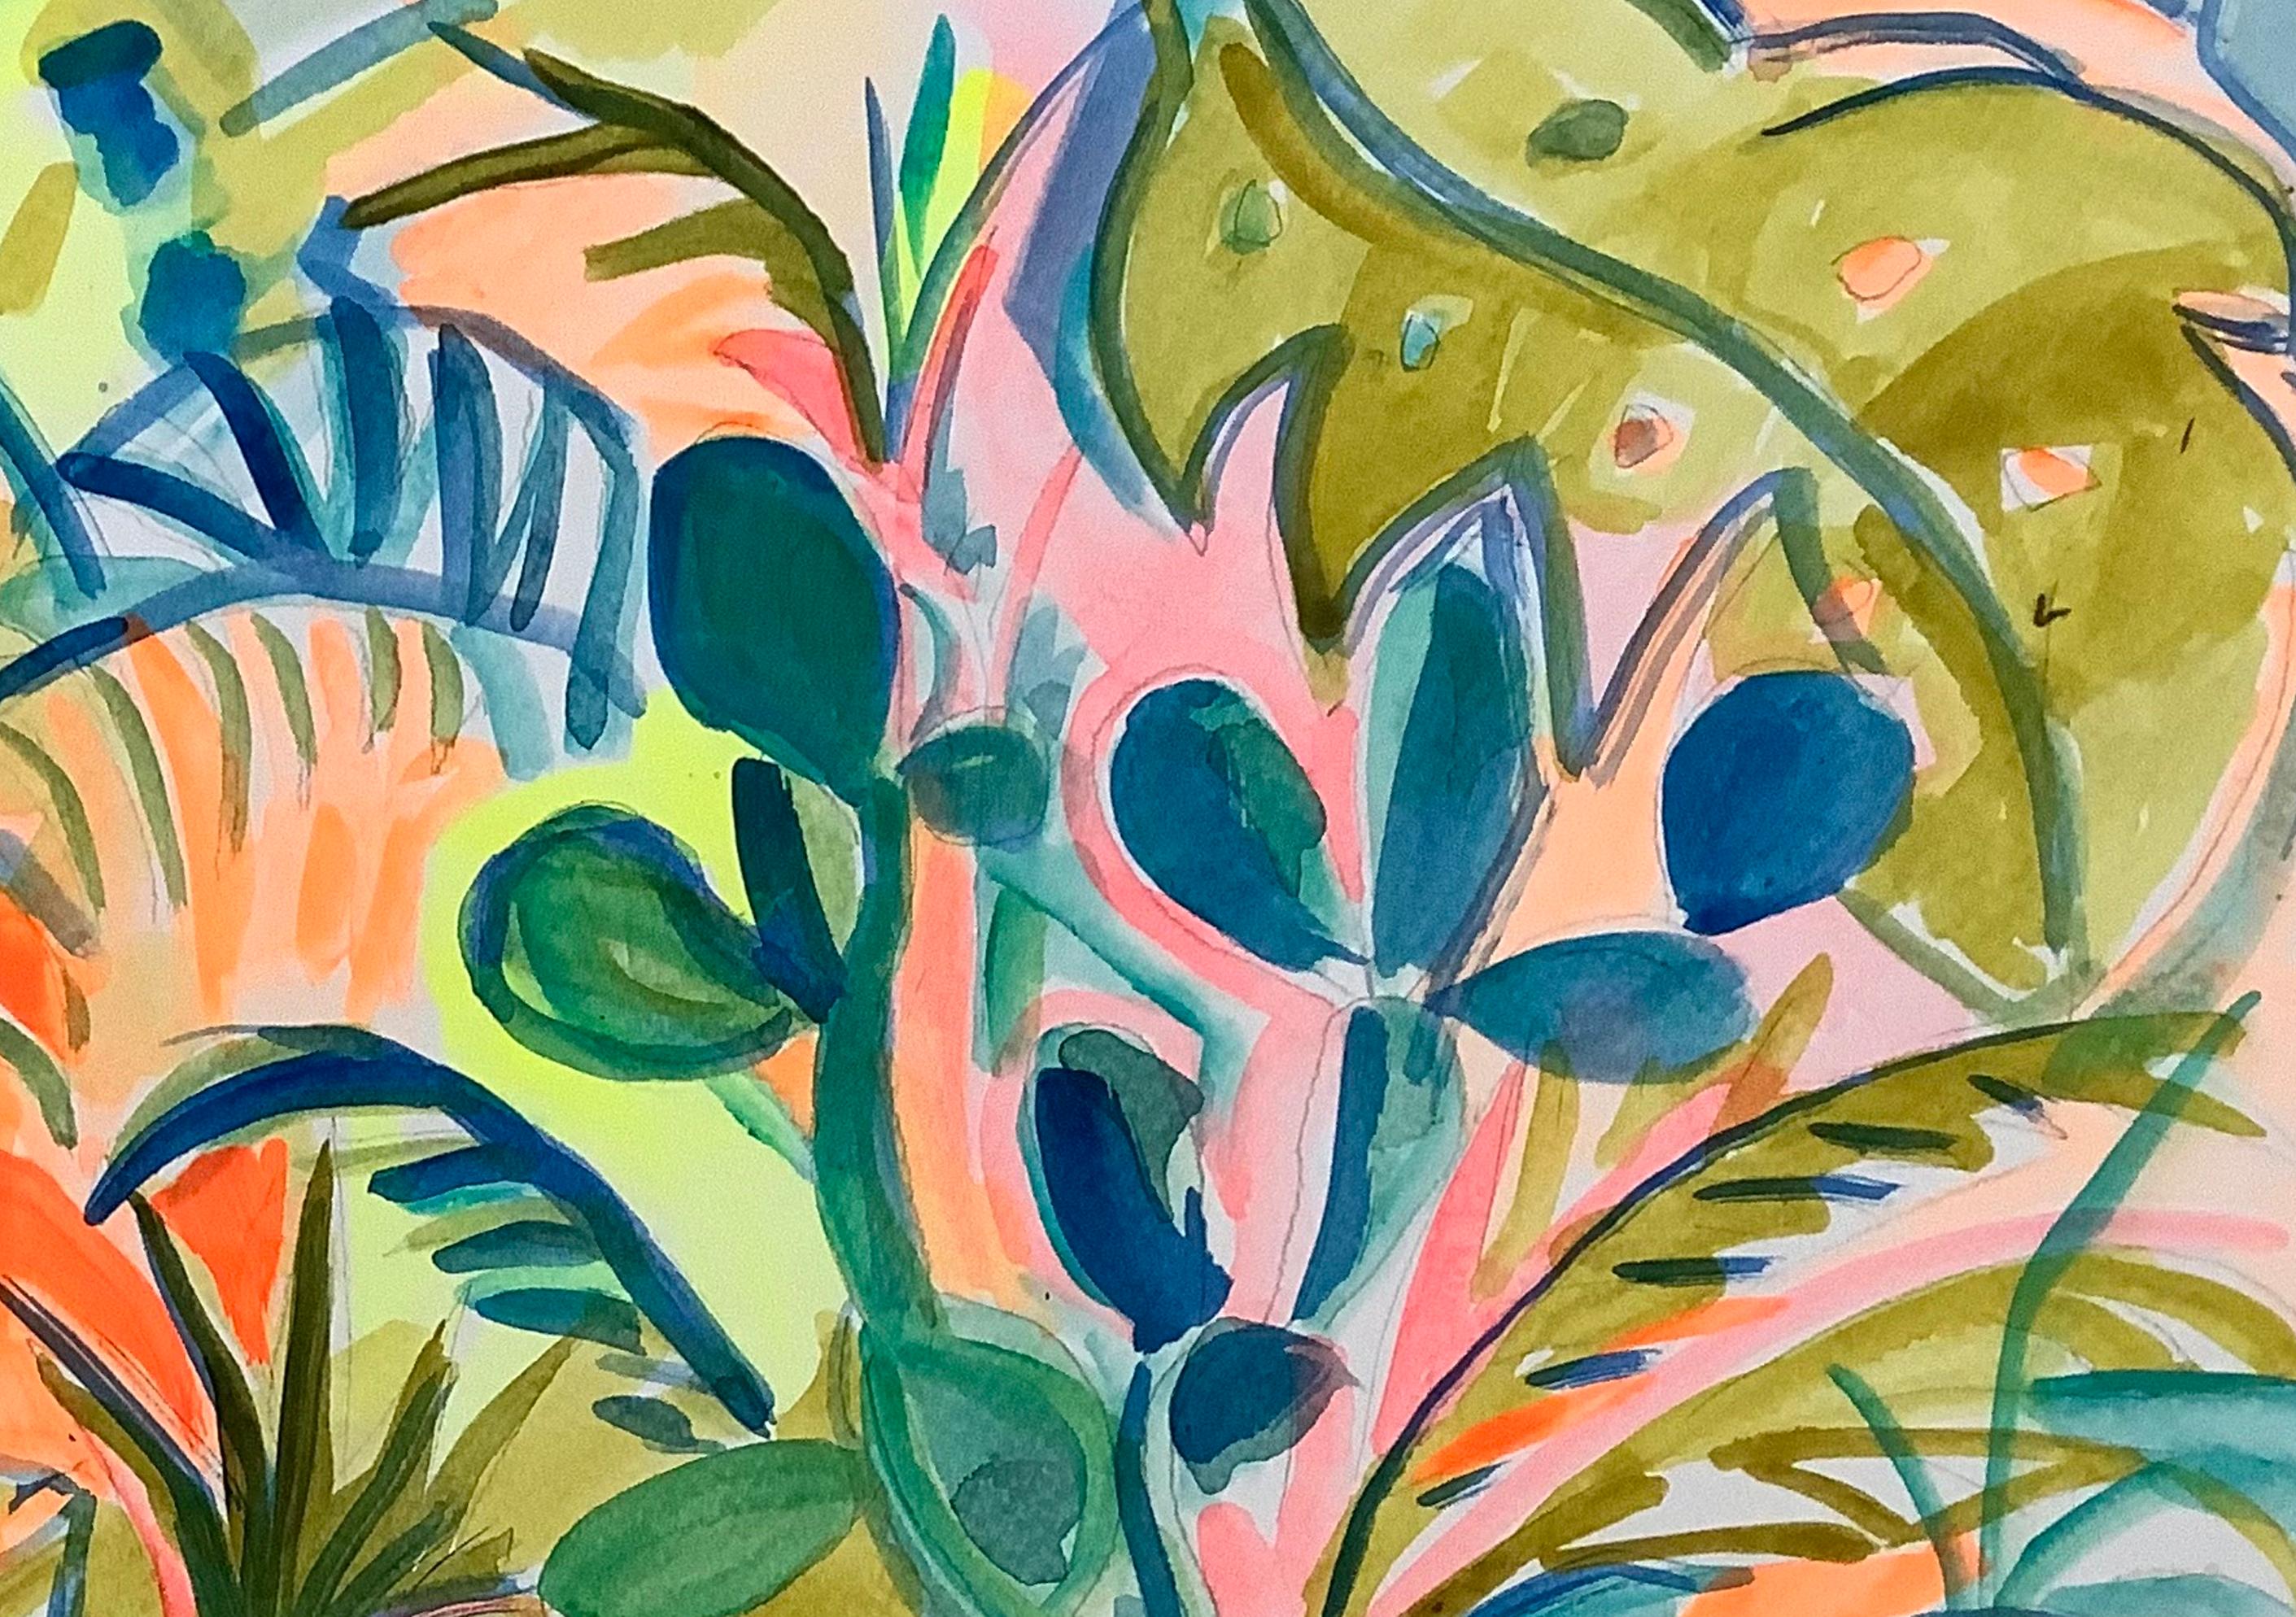 Pots in the Jungle, Acrylic on watercolour paper, 29x42cm, 2021 - Contemporary Painting by Emi Avora